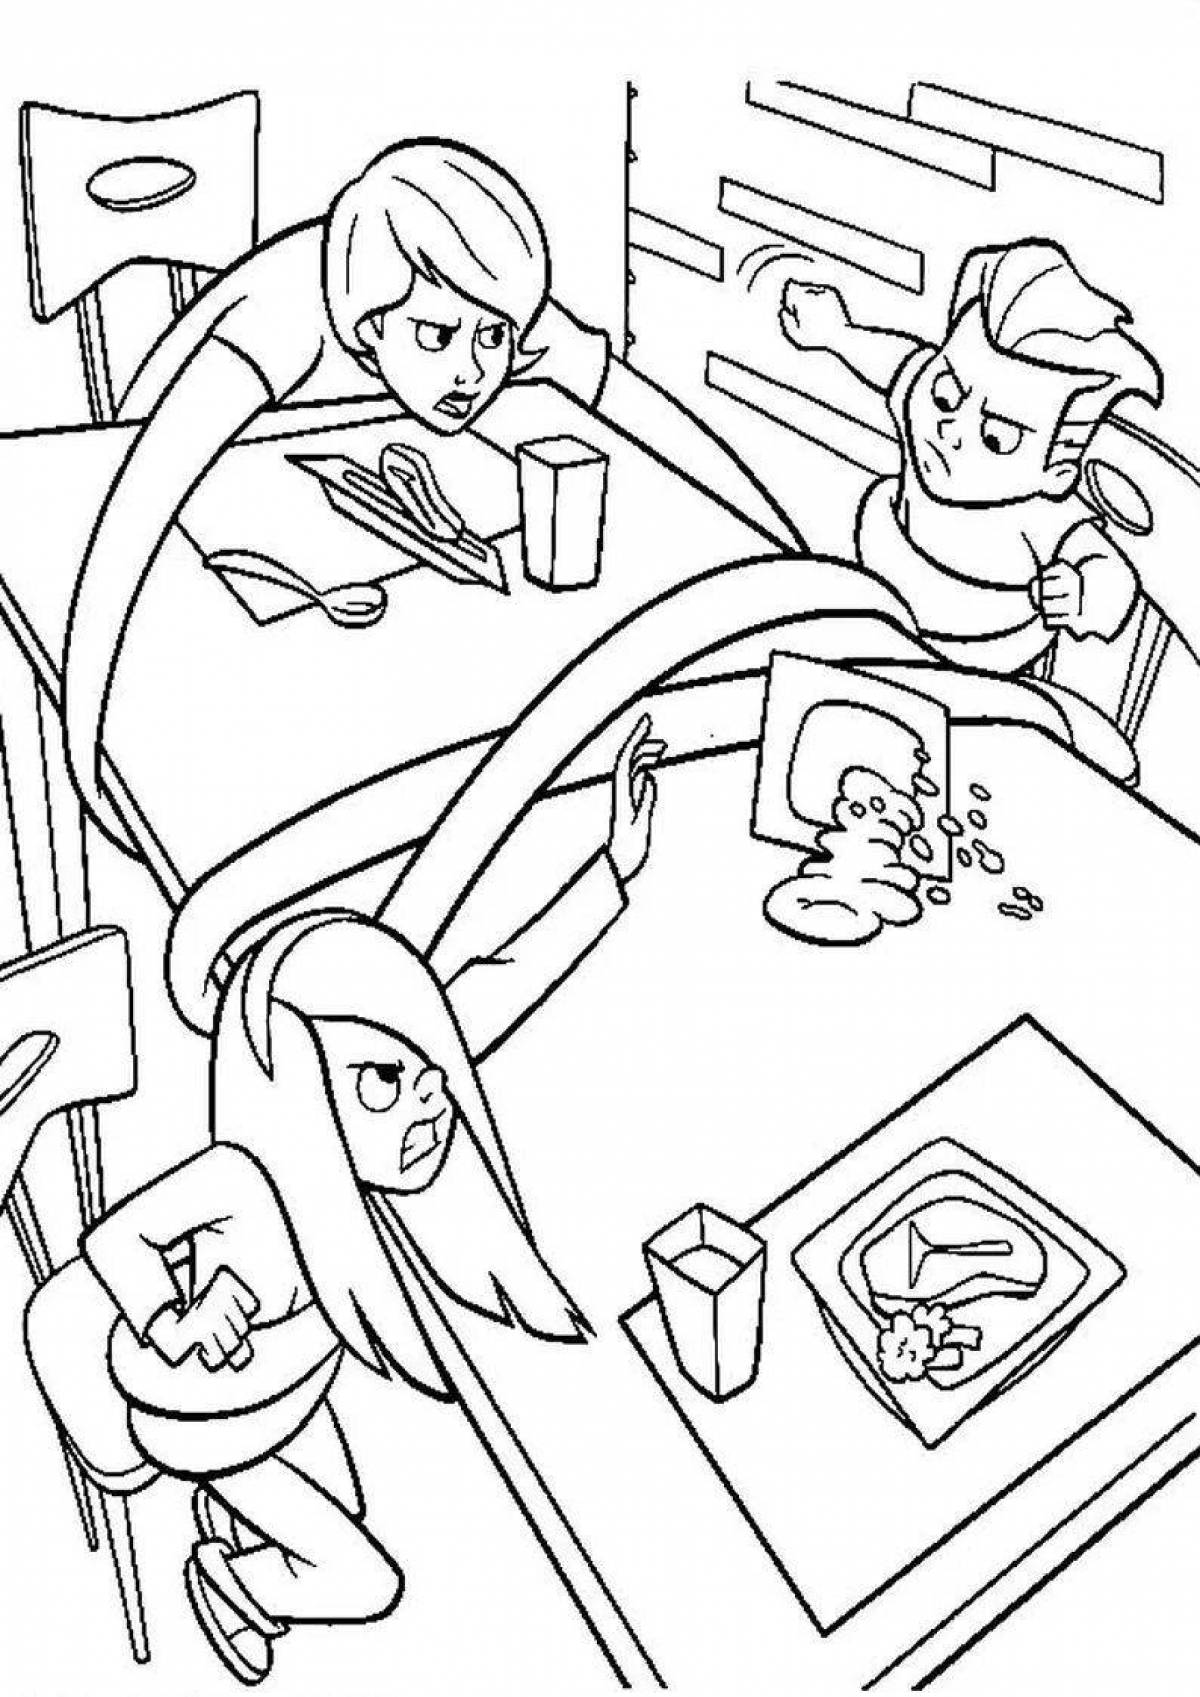 Amazing Incredibles coloring pages for kids